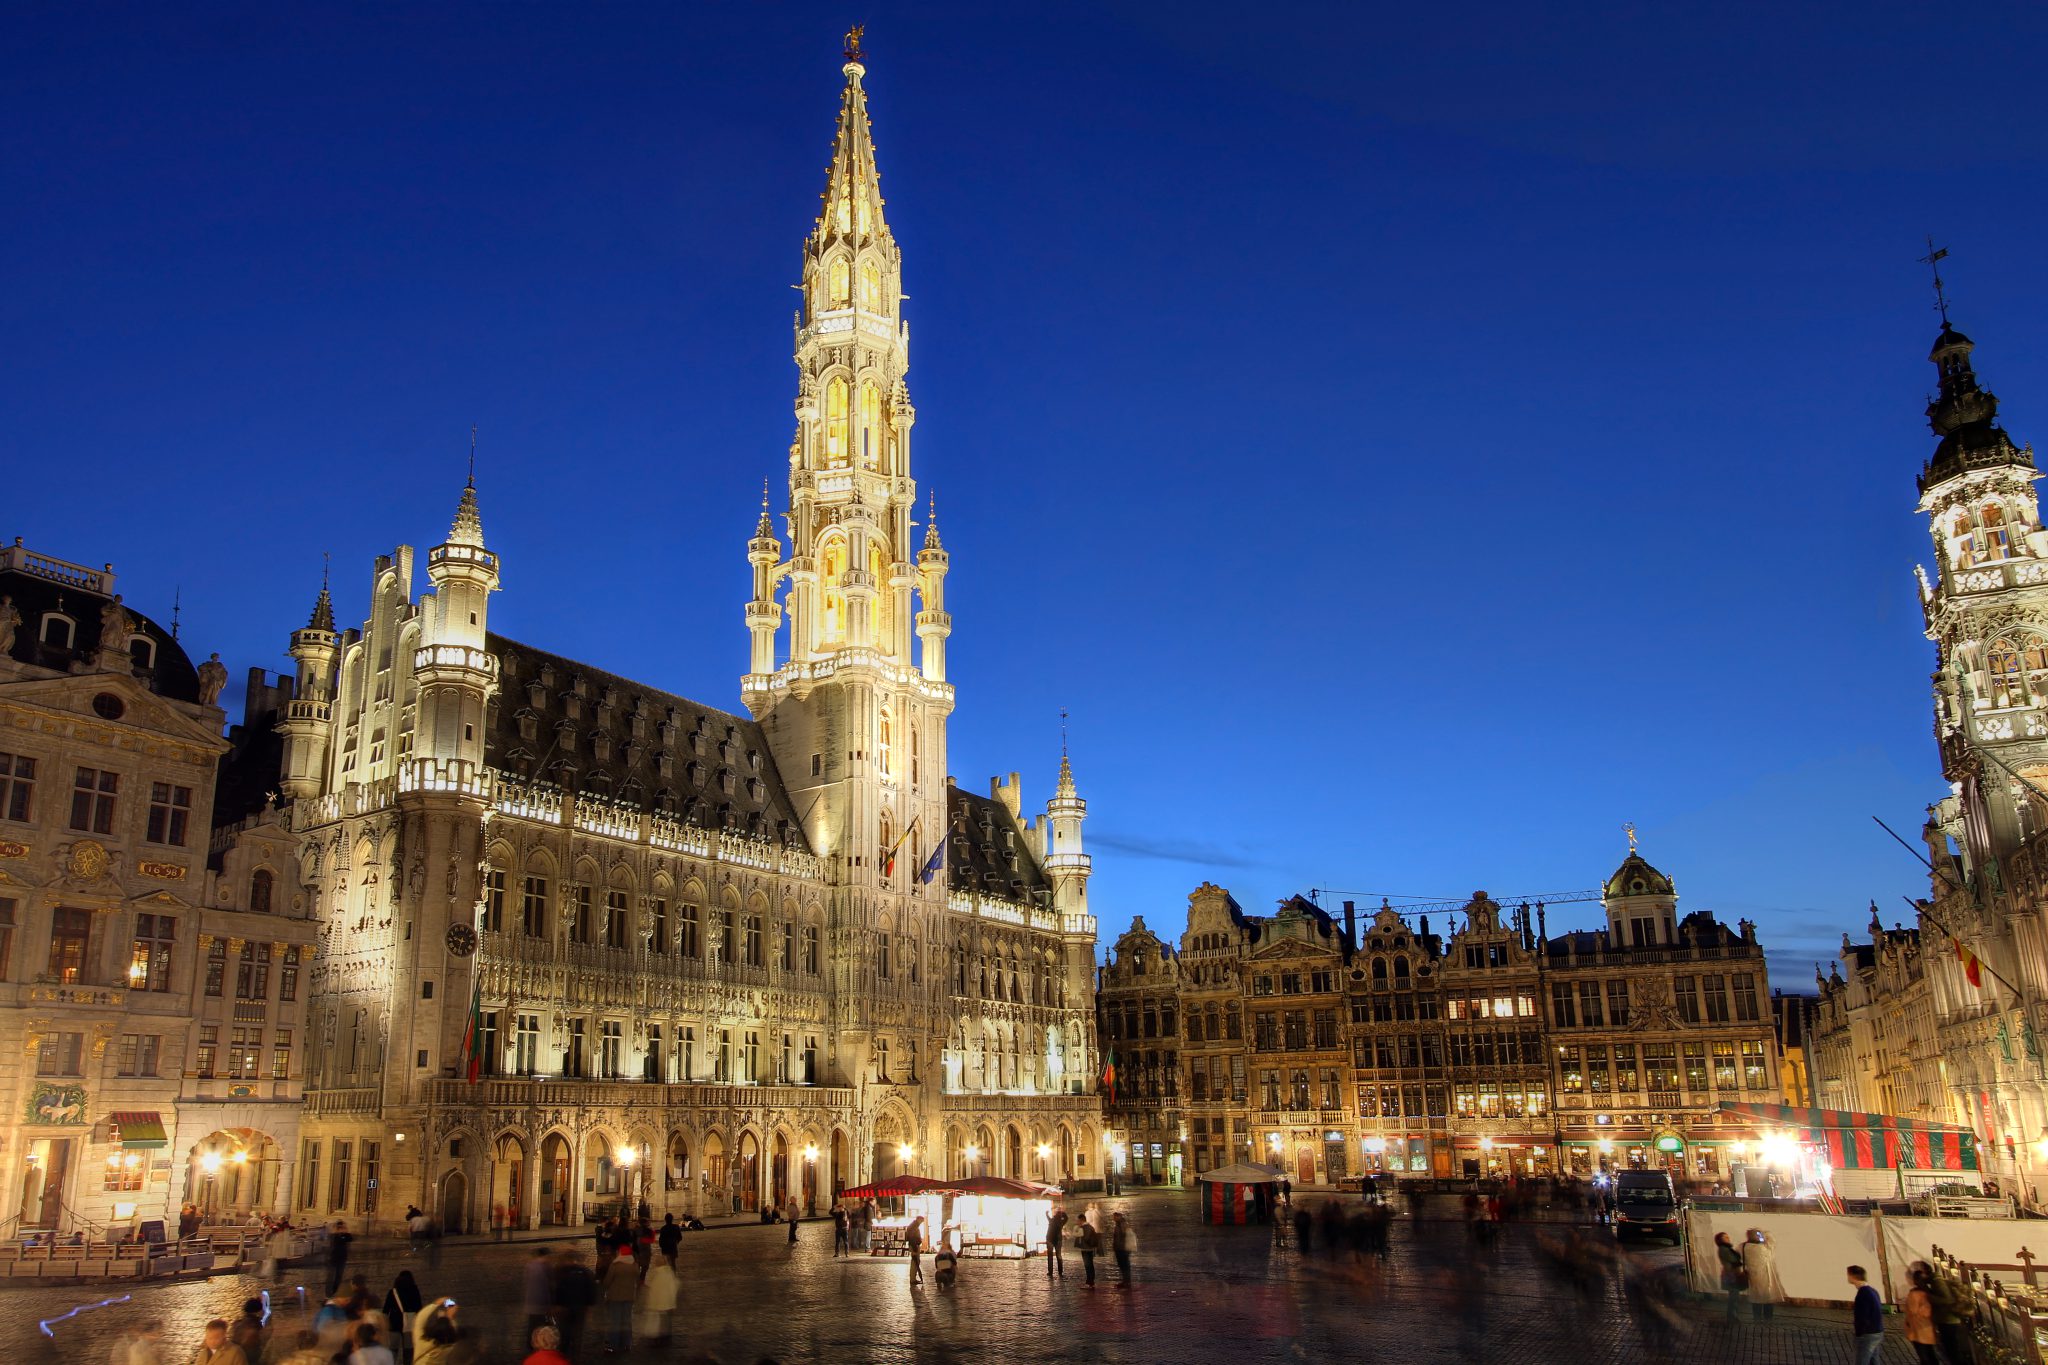 http://www.dreamstime.com/royalty-free-stock-image-grand-place-brussels-belgium-image24751996